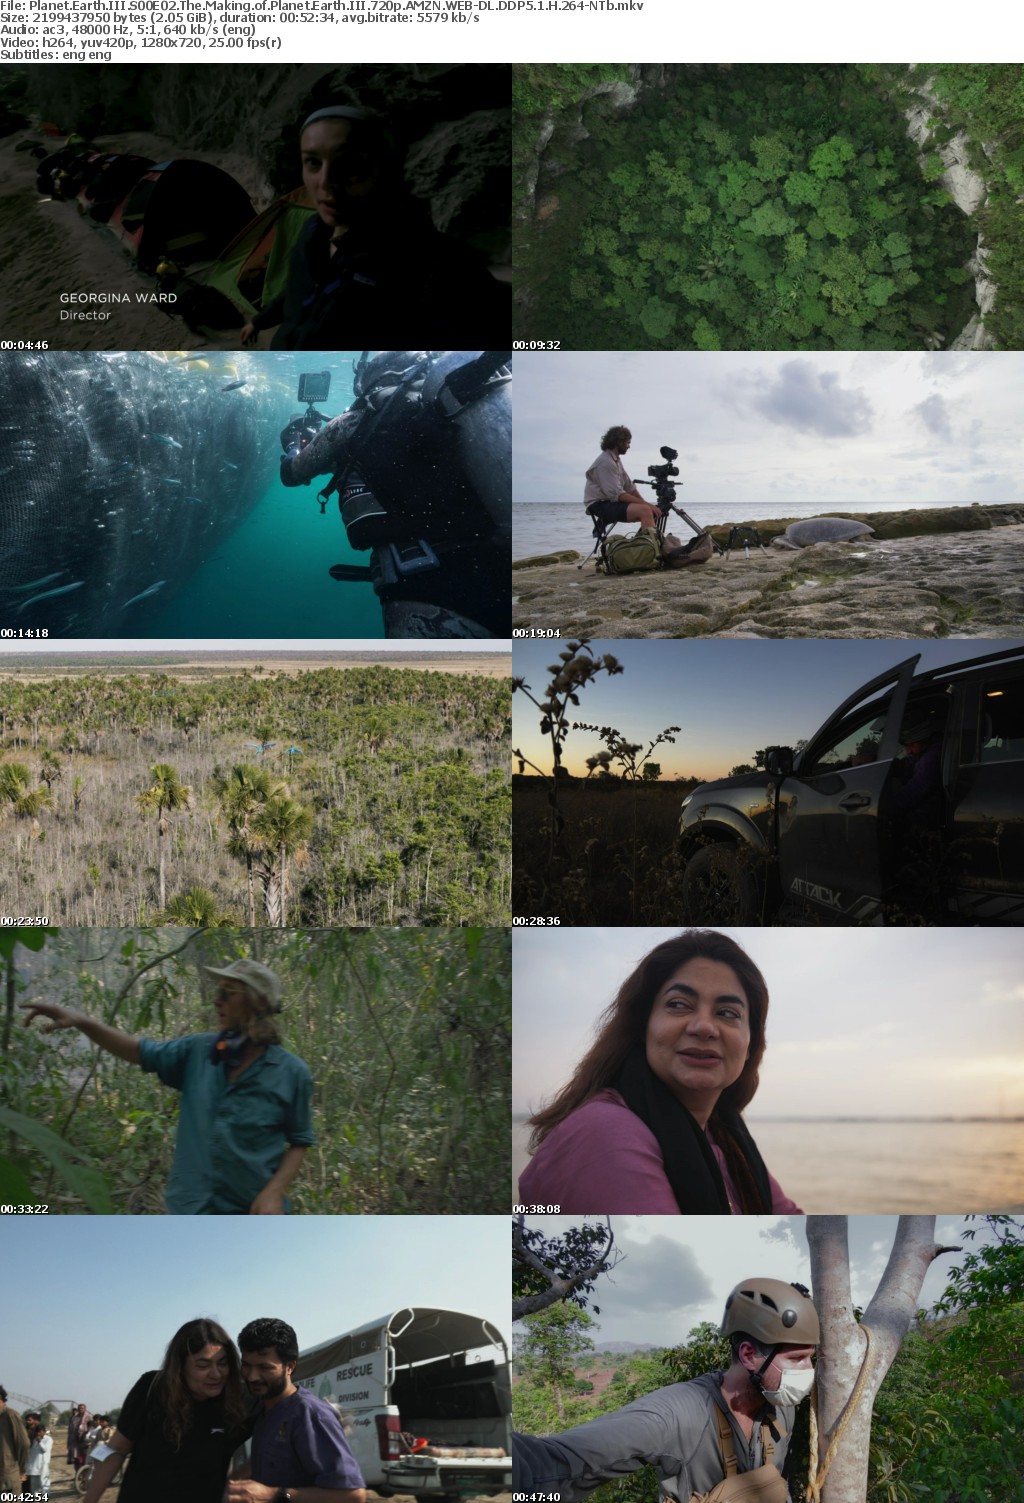 Planet Earth III S00E02 The Making of Planet Earth III 720p AMZN WEB-DL DDP5 1 H 264-NTb